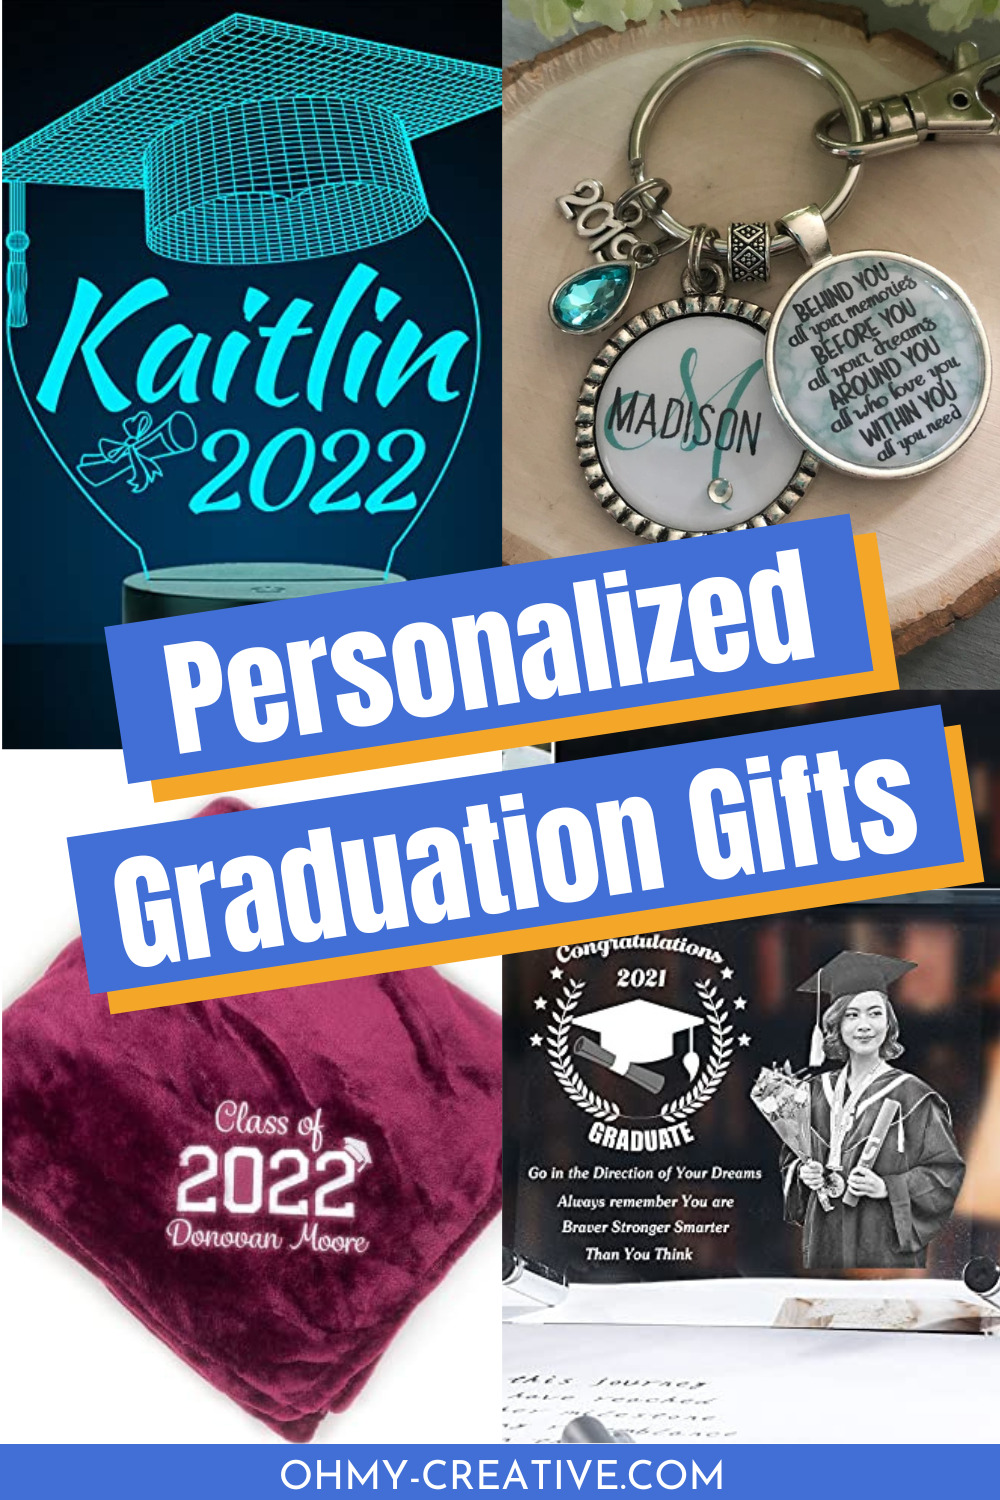 A collage of personalized graduation gifts including tumblers, plaques and more.